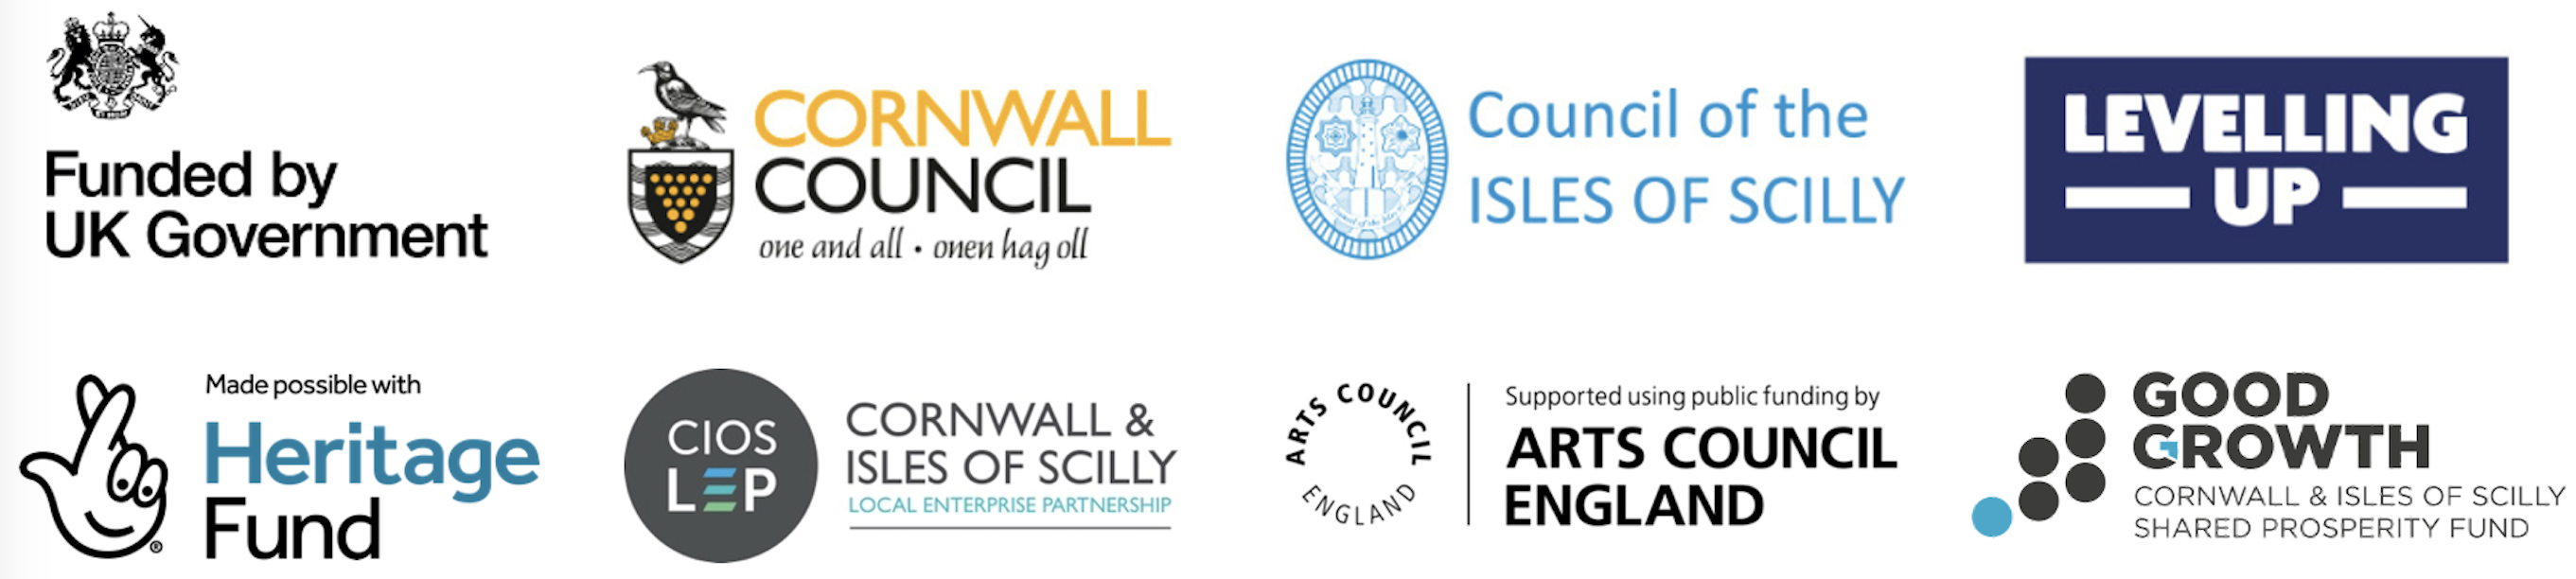 Logos for UK Government, Cornwall Council, Council of the Isles of Scilly, Levelling Up Fund, National Lottery Heritage Fund, Cornwall and Isles of Scilly Local Enterprise Partnership, Arts Council England and the Cornwall and Isles of Scilly Shared Prosperity Fund